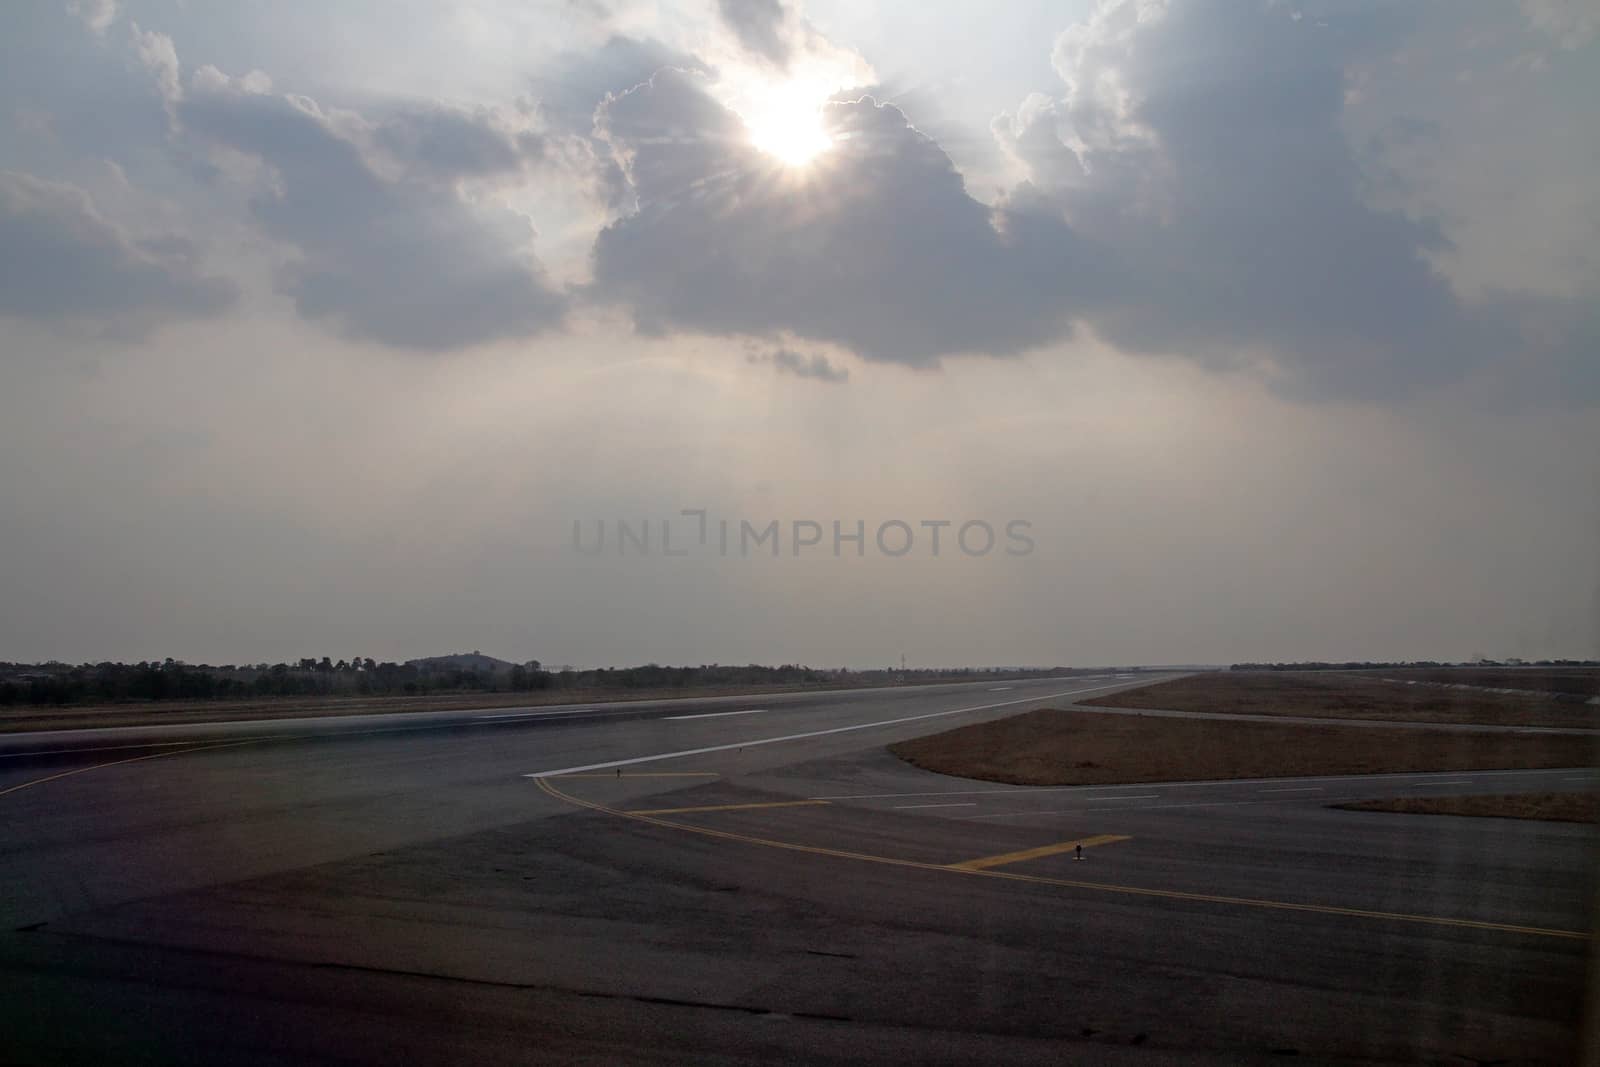 the sun shining through a layer of rain cluds as a  burst of white  light over an airport runway 